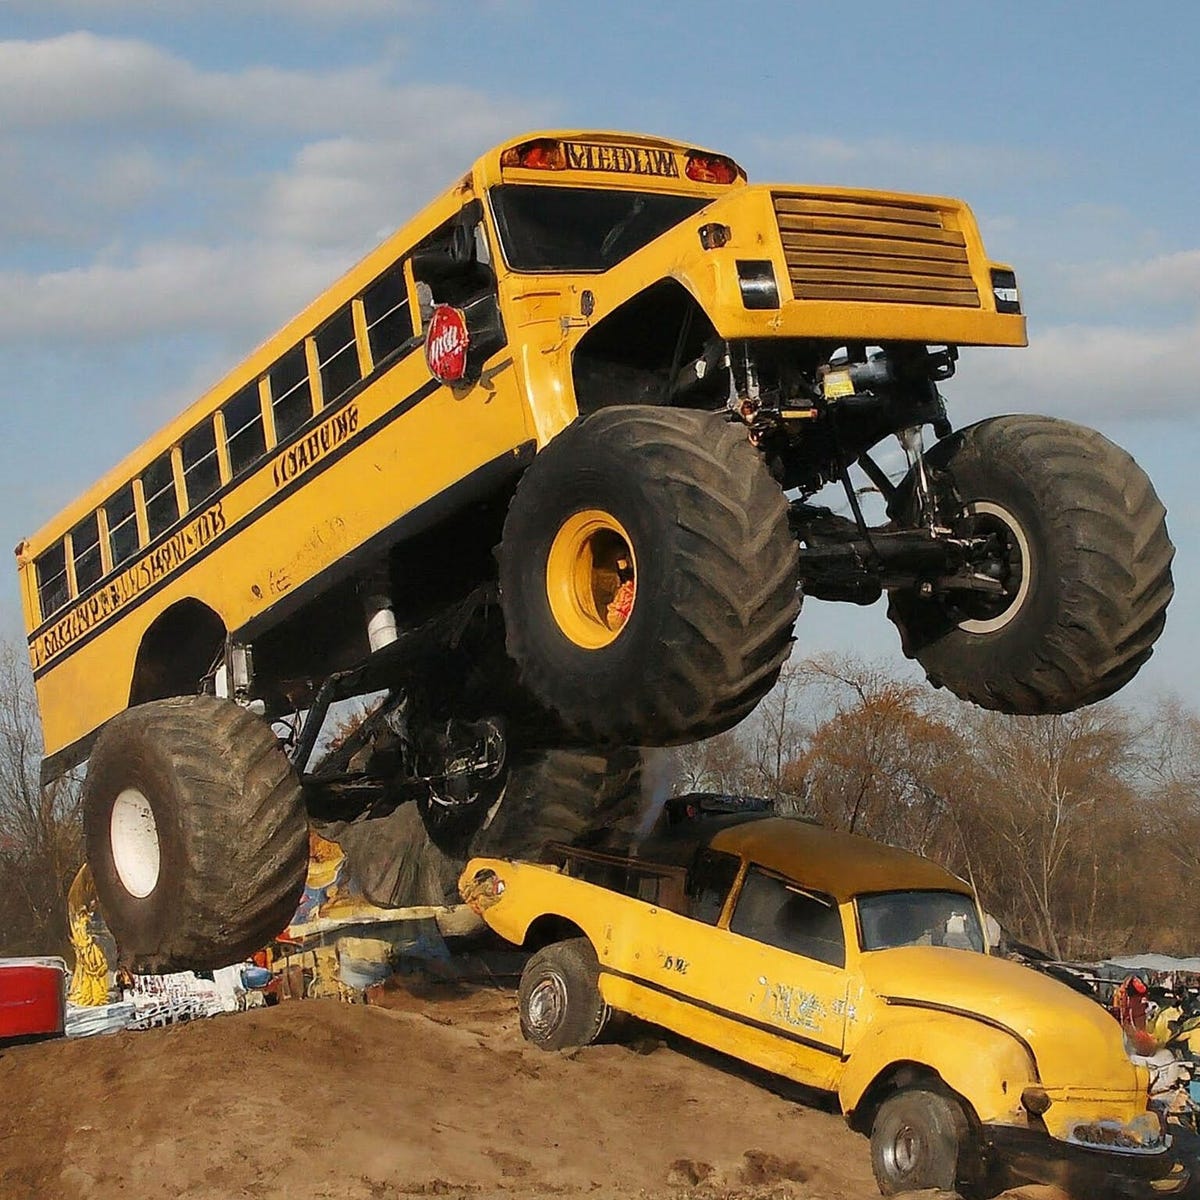 An AI-generated image of a yellow monster bus jumping over a truck.